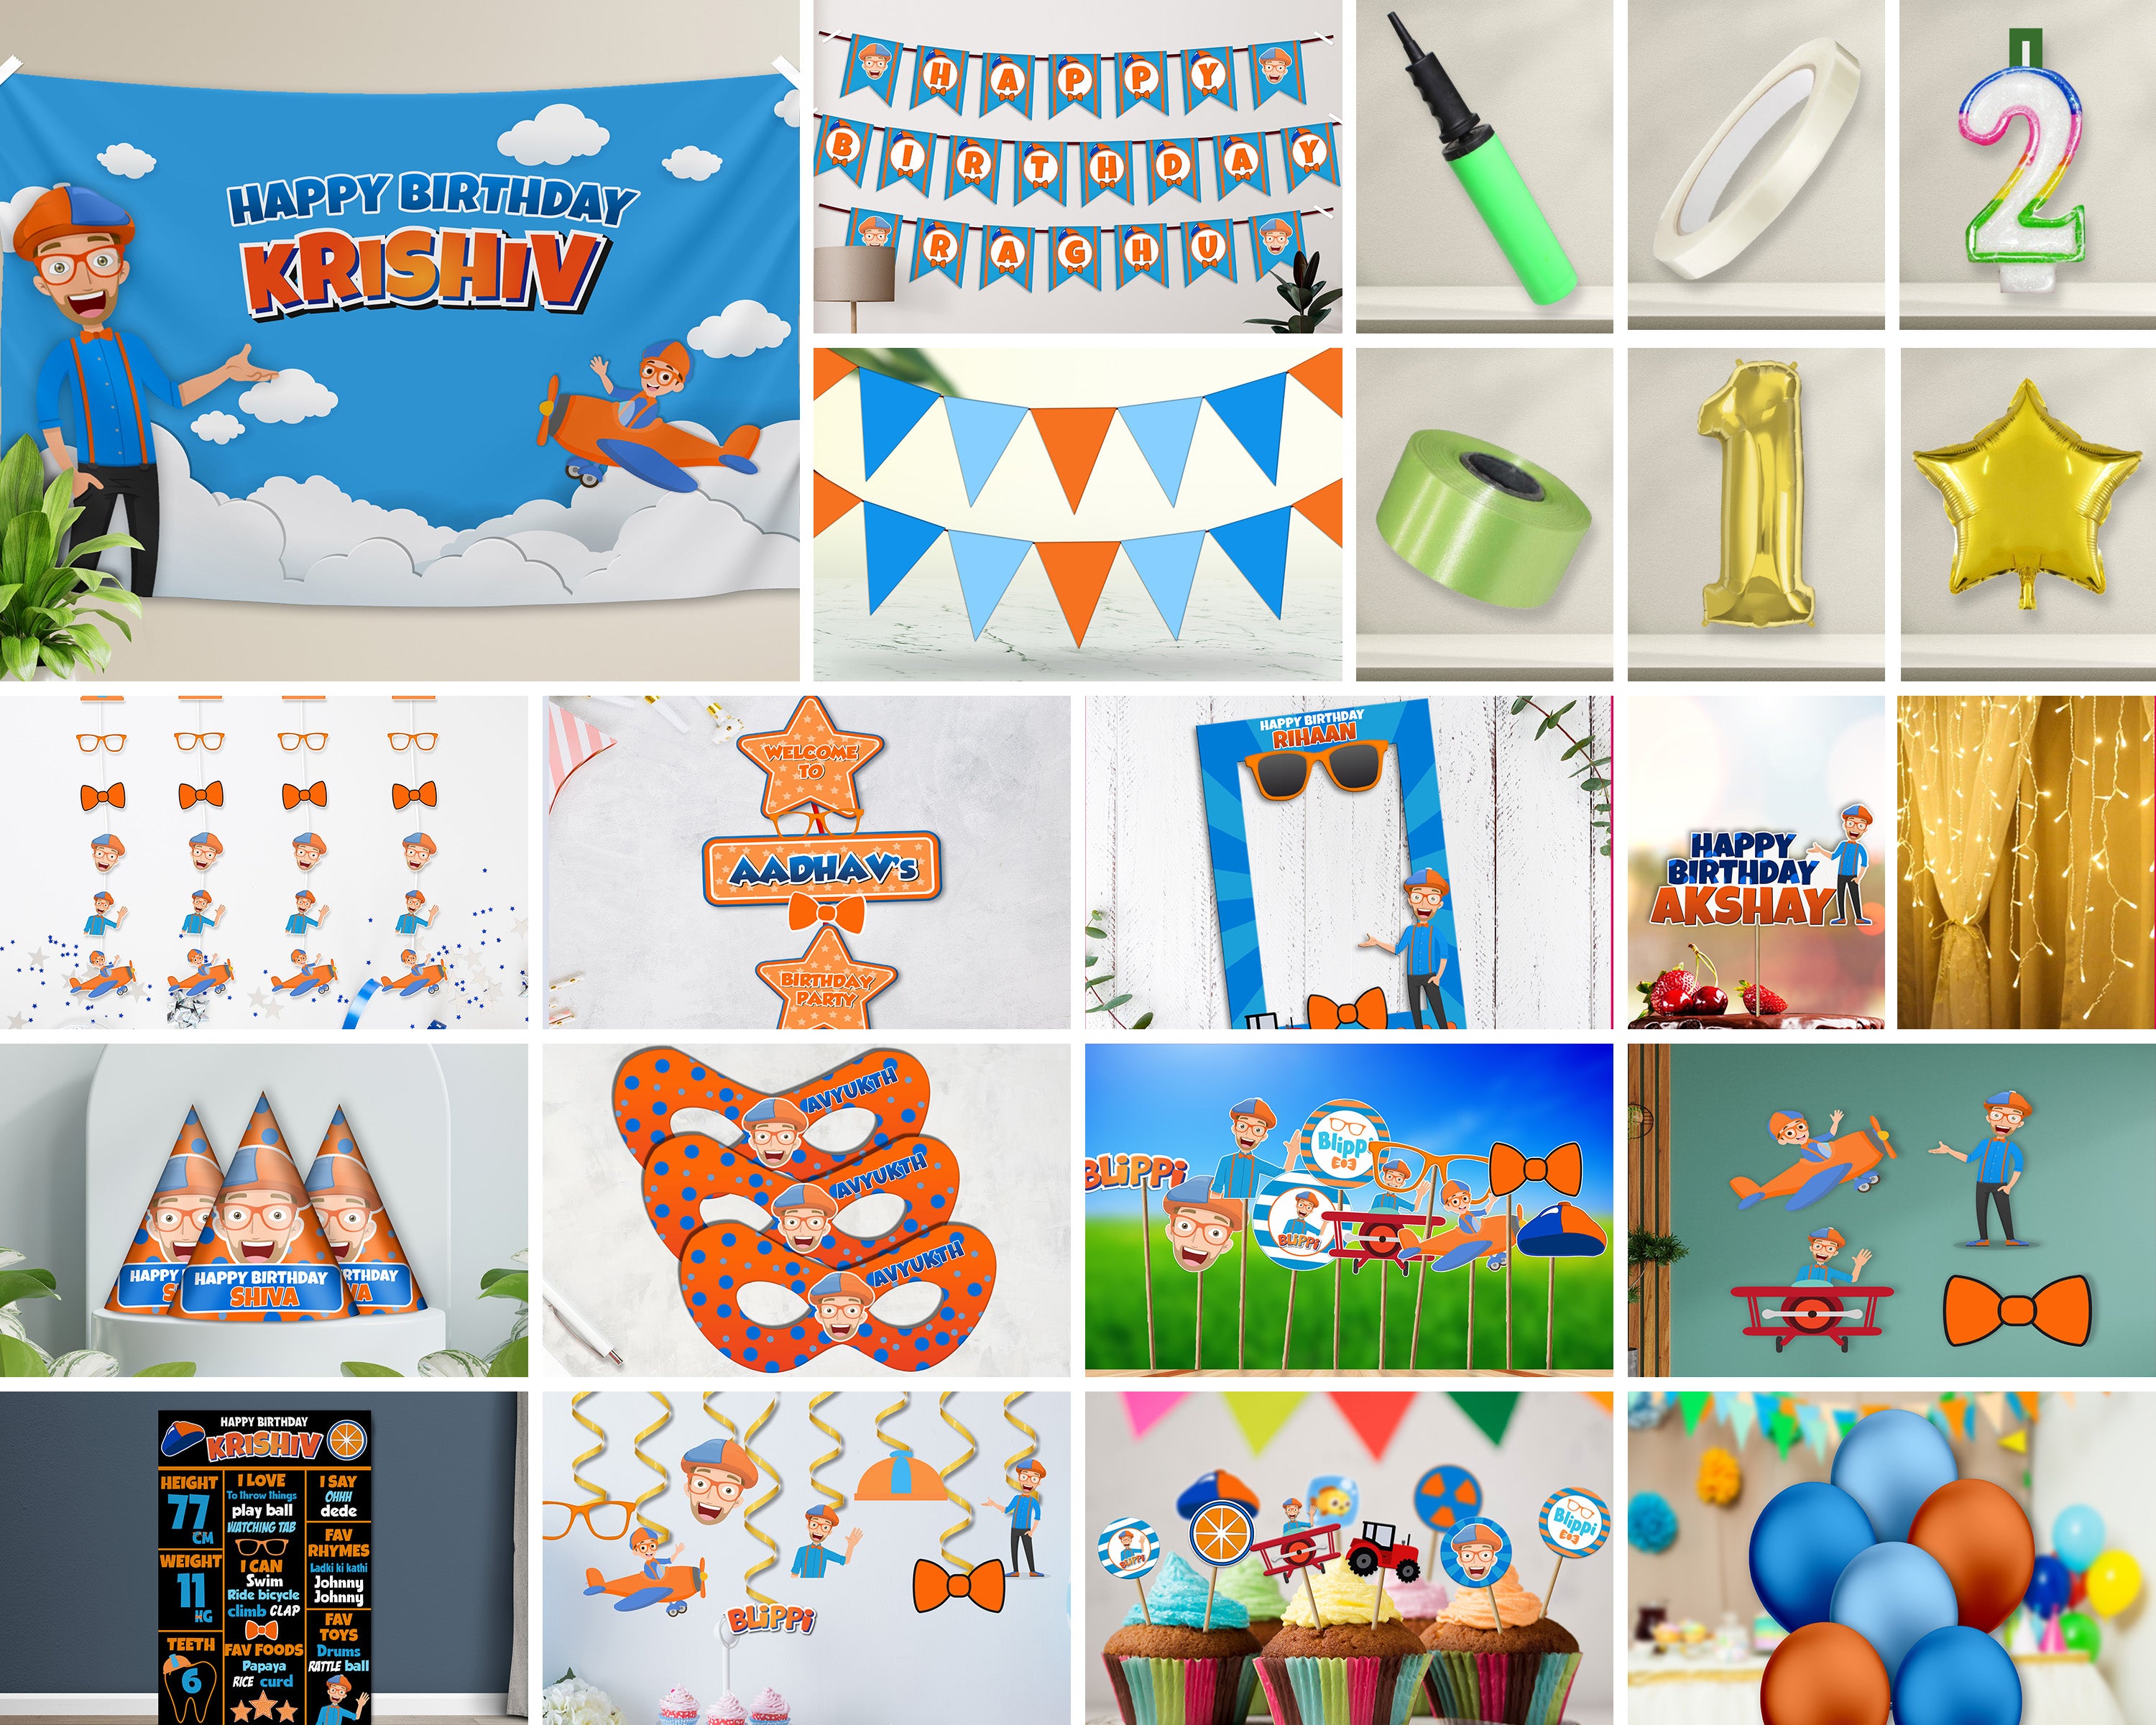 PSI Blippi Theme Water Bottle Sticker  Birthday Party Combo Kits – Party  Supplies India